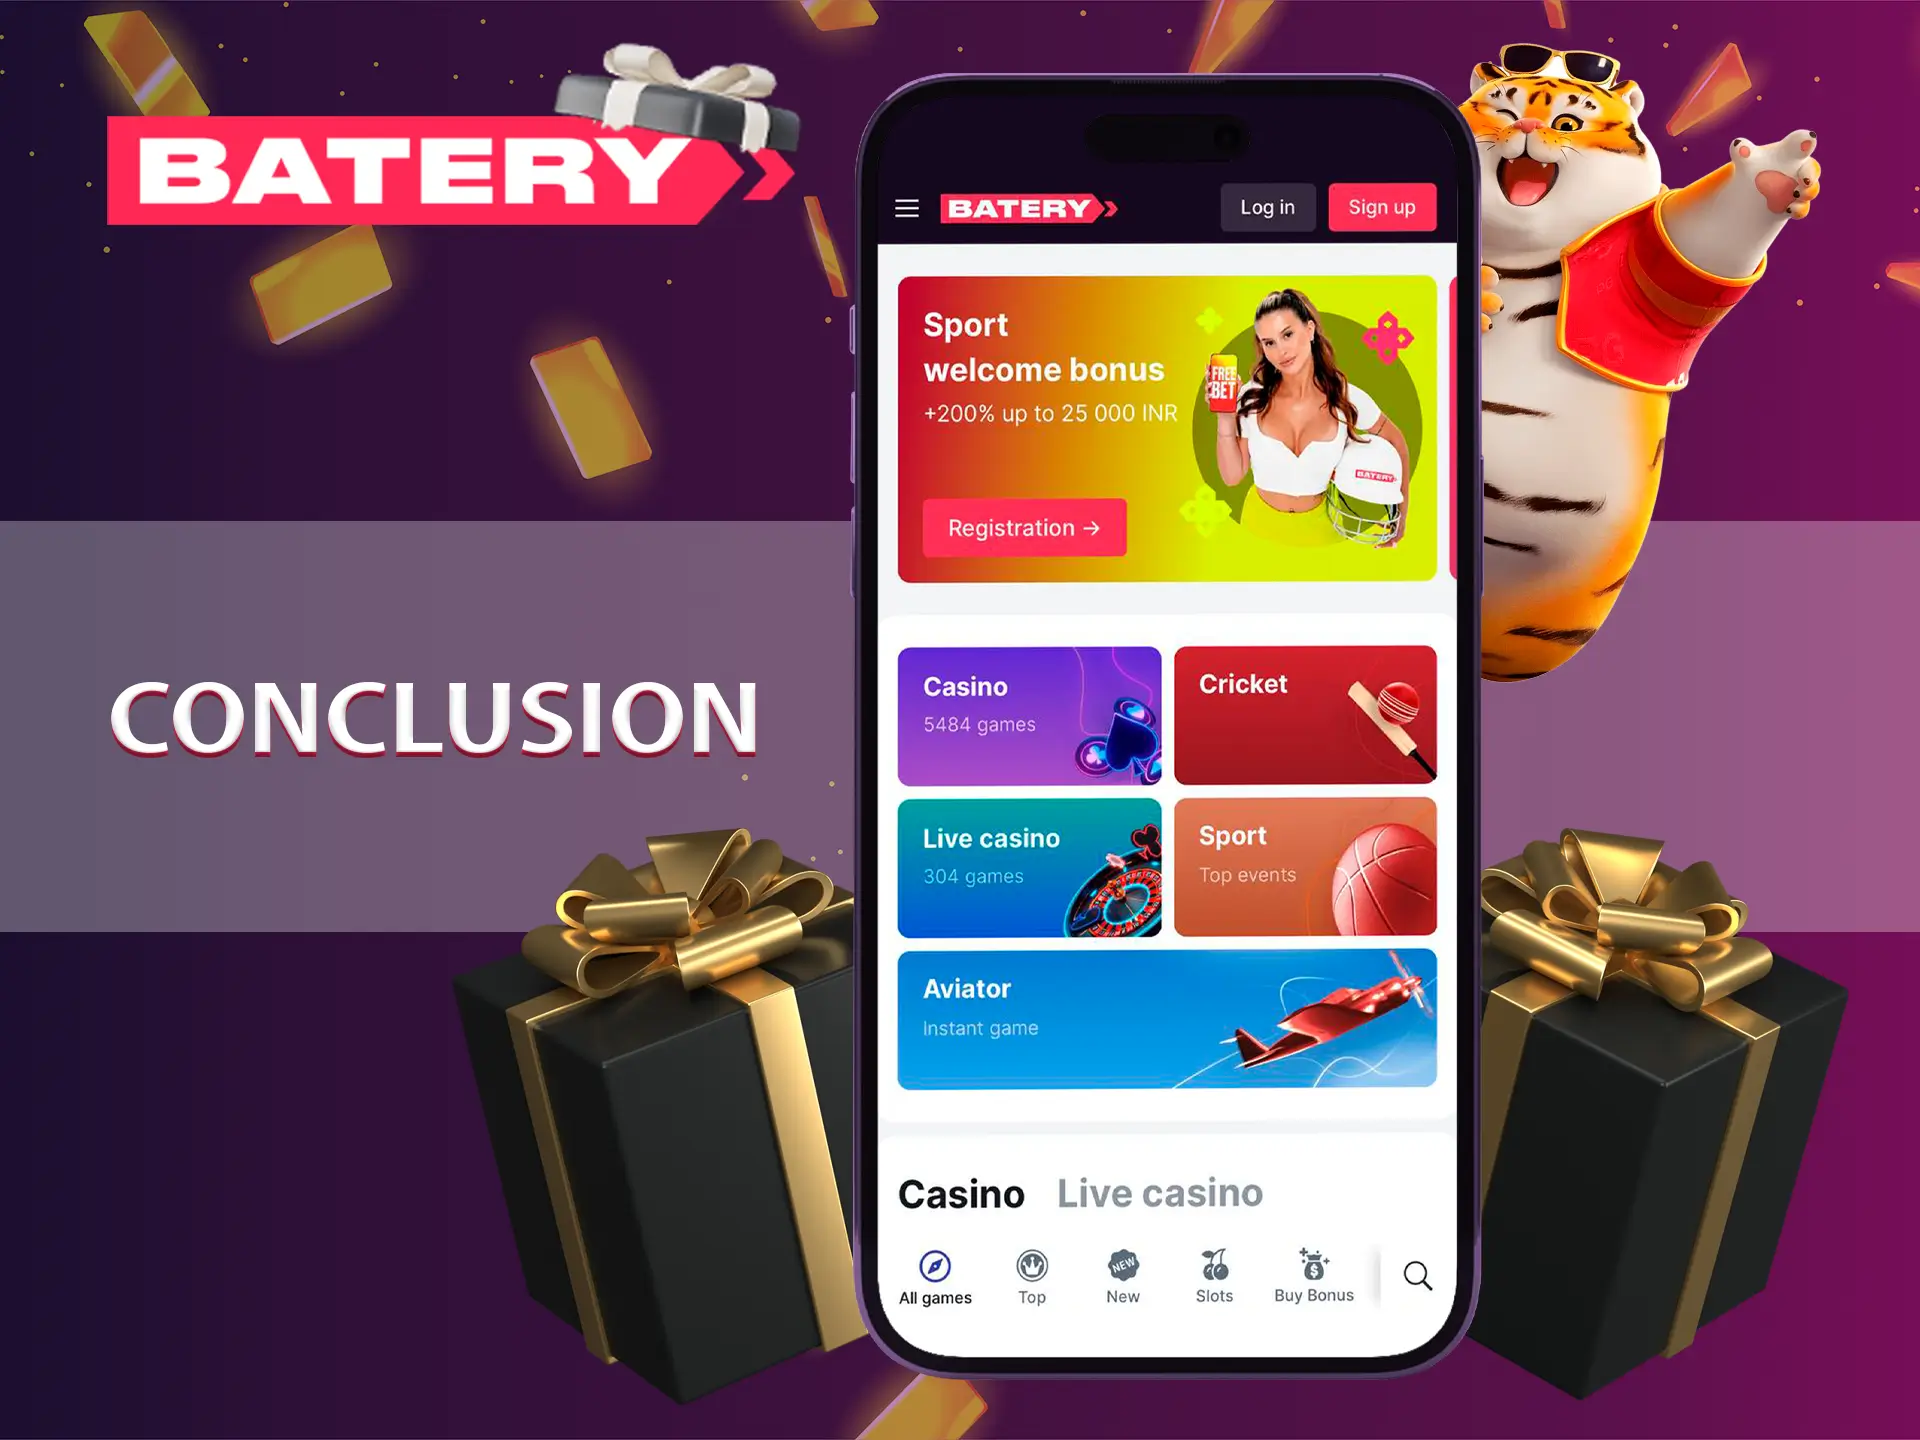 Play at Batery online casino and get big wins and awesome bonuses.